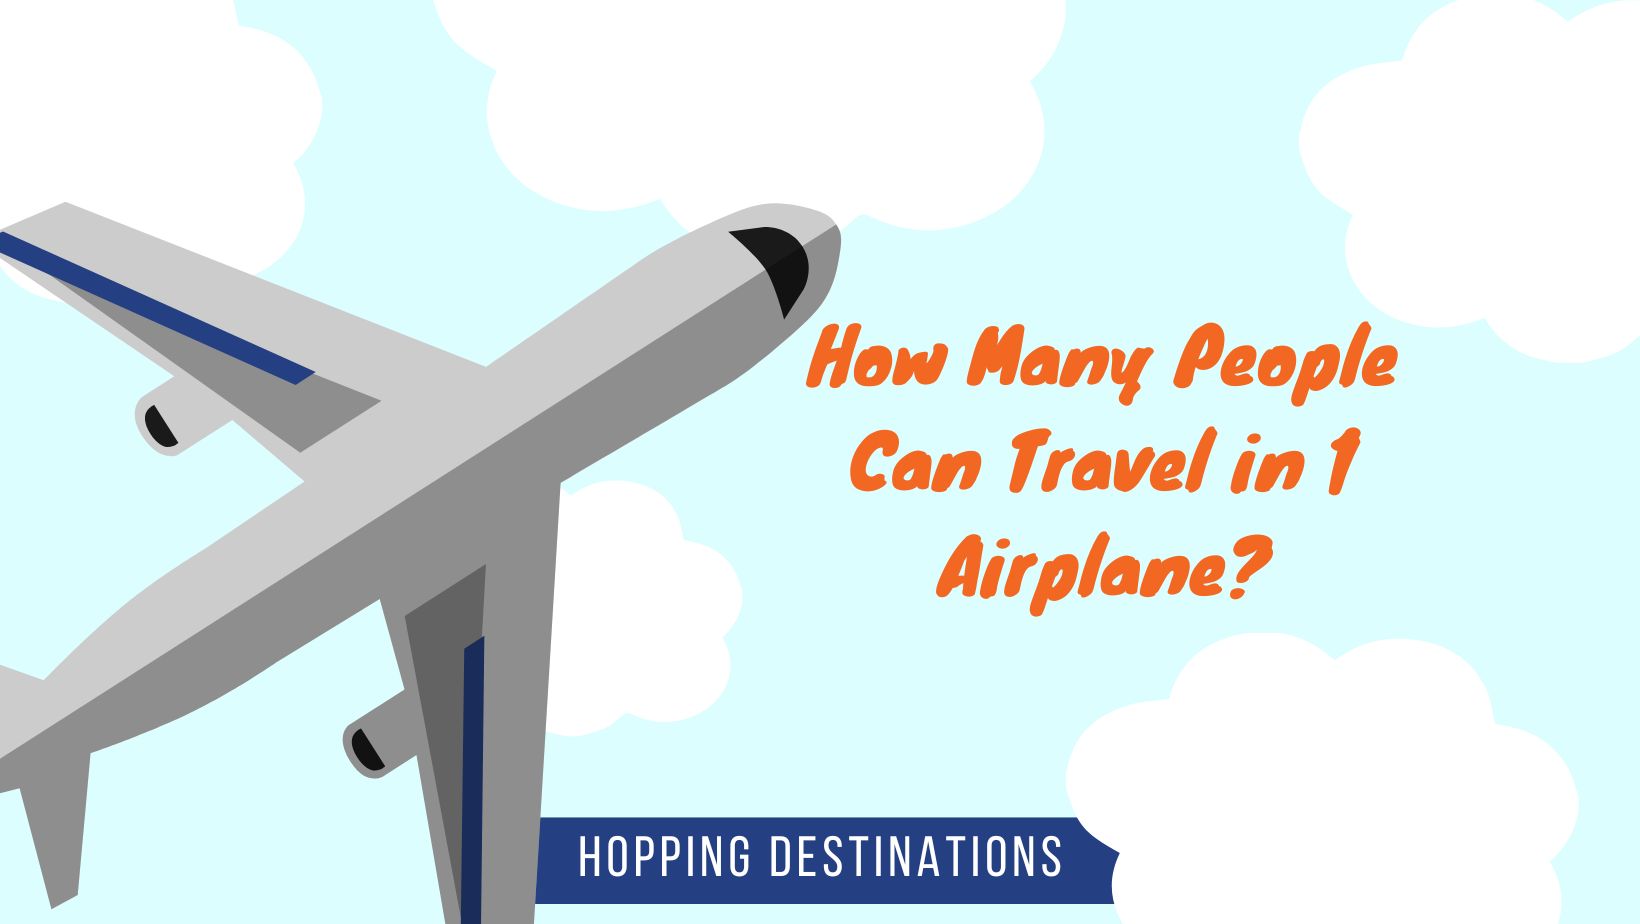 How Many People Can Travel in 1 Airplane?